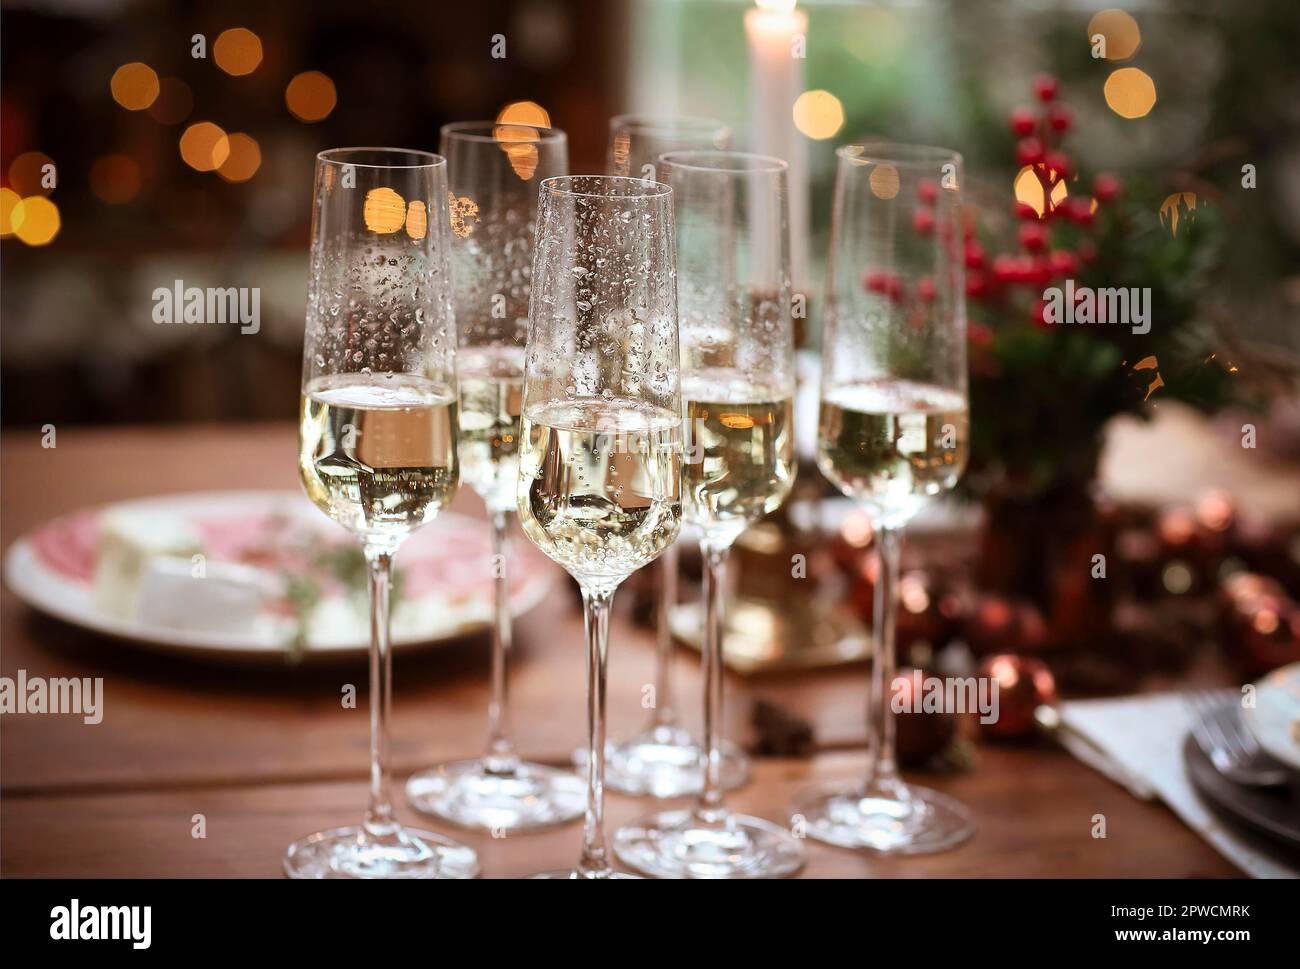 https://c8.alamy.com/comp/2PWCMRK/set-of-champagne-glasses-on-wooden-table-with-candles-against-blurred-wall-with-christmas-tree-2PWCMRK.jpg